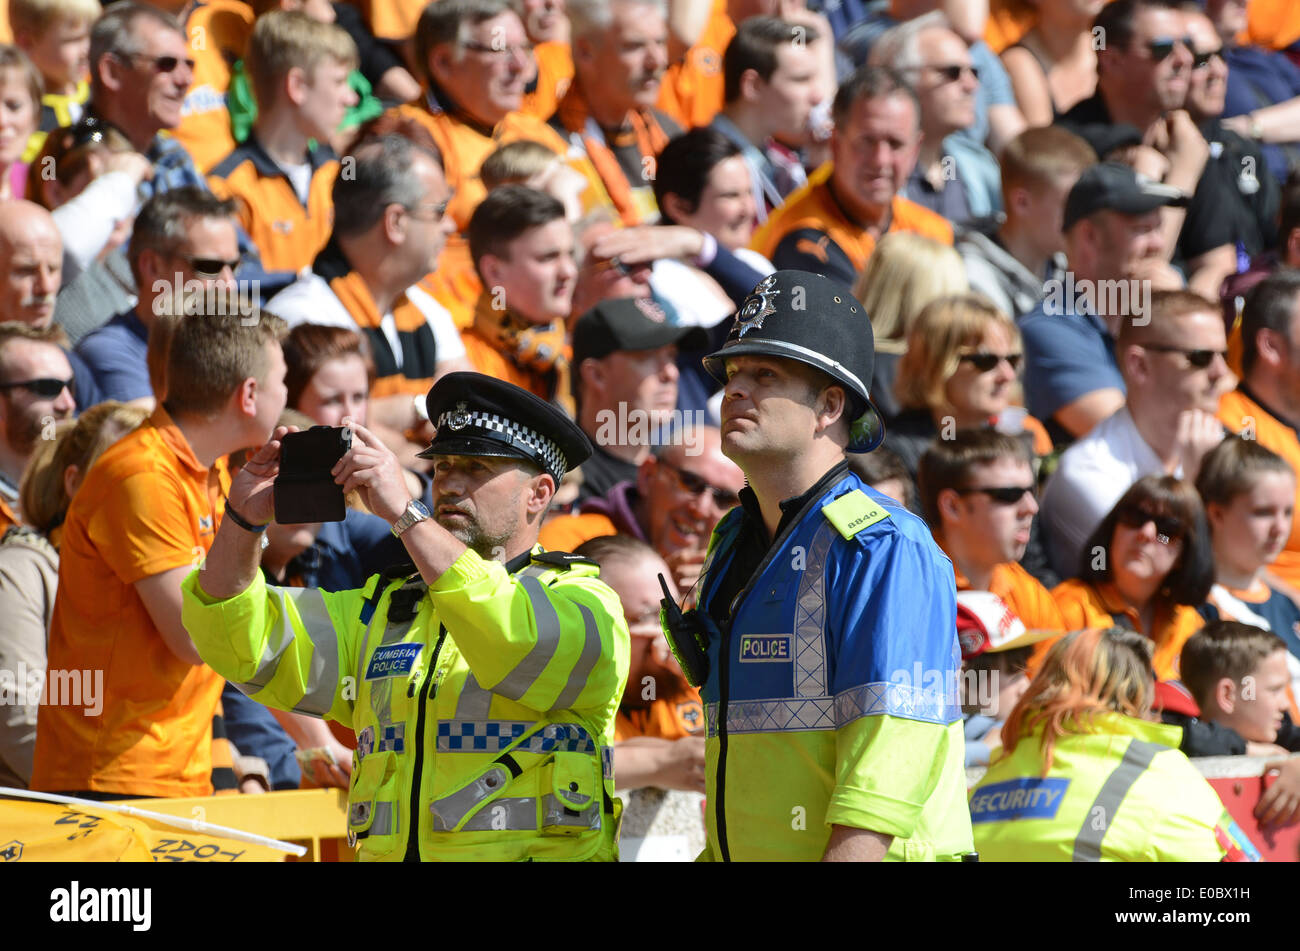 Police officer officers policing football match Uk Stock Photo